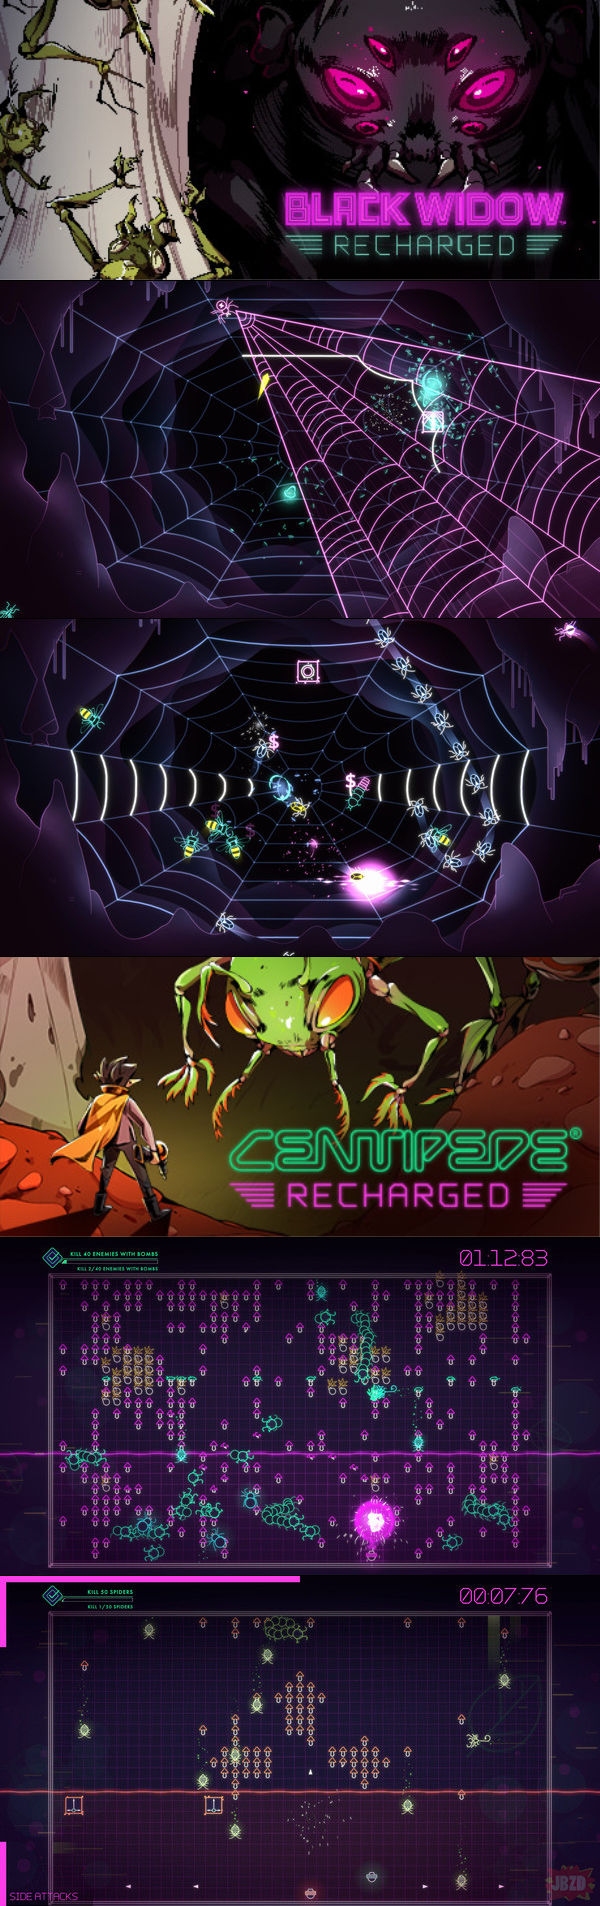 Black Widow: Recharged i Centipede: Recharged za darmo w Free Games Store